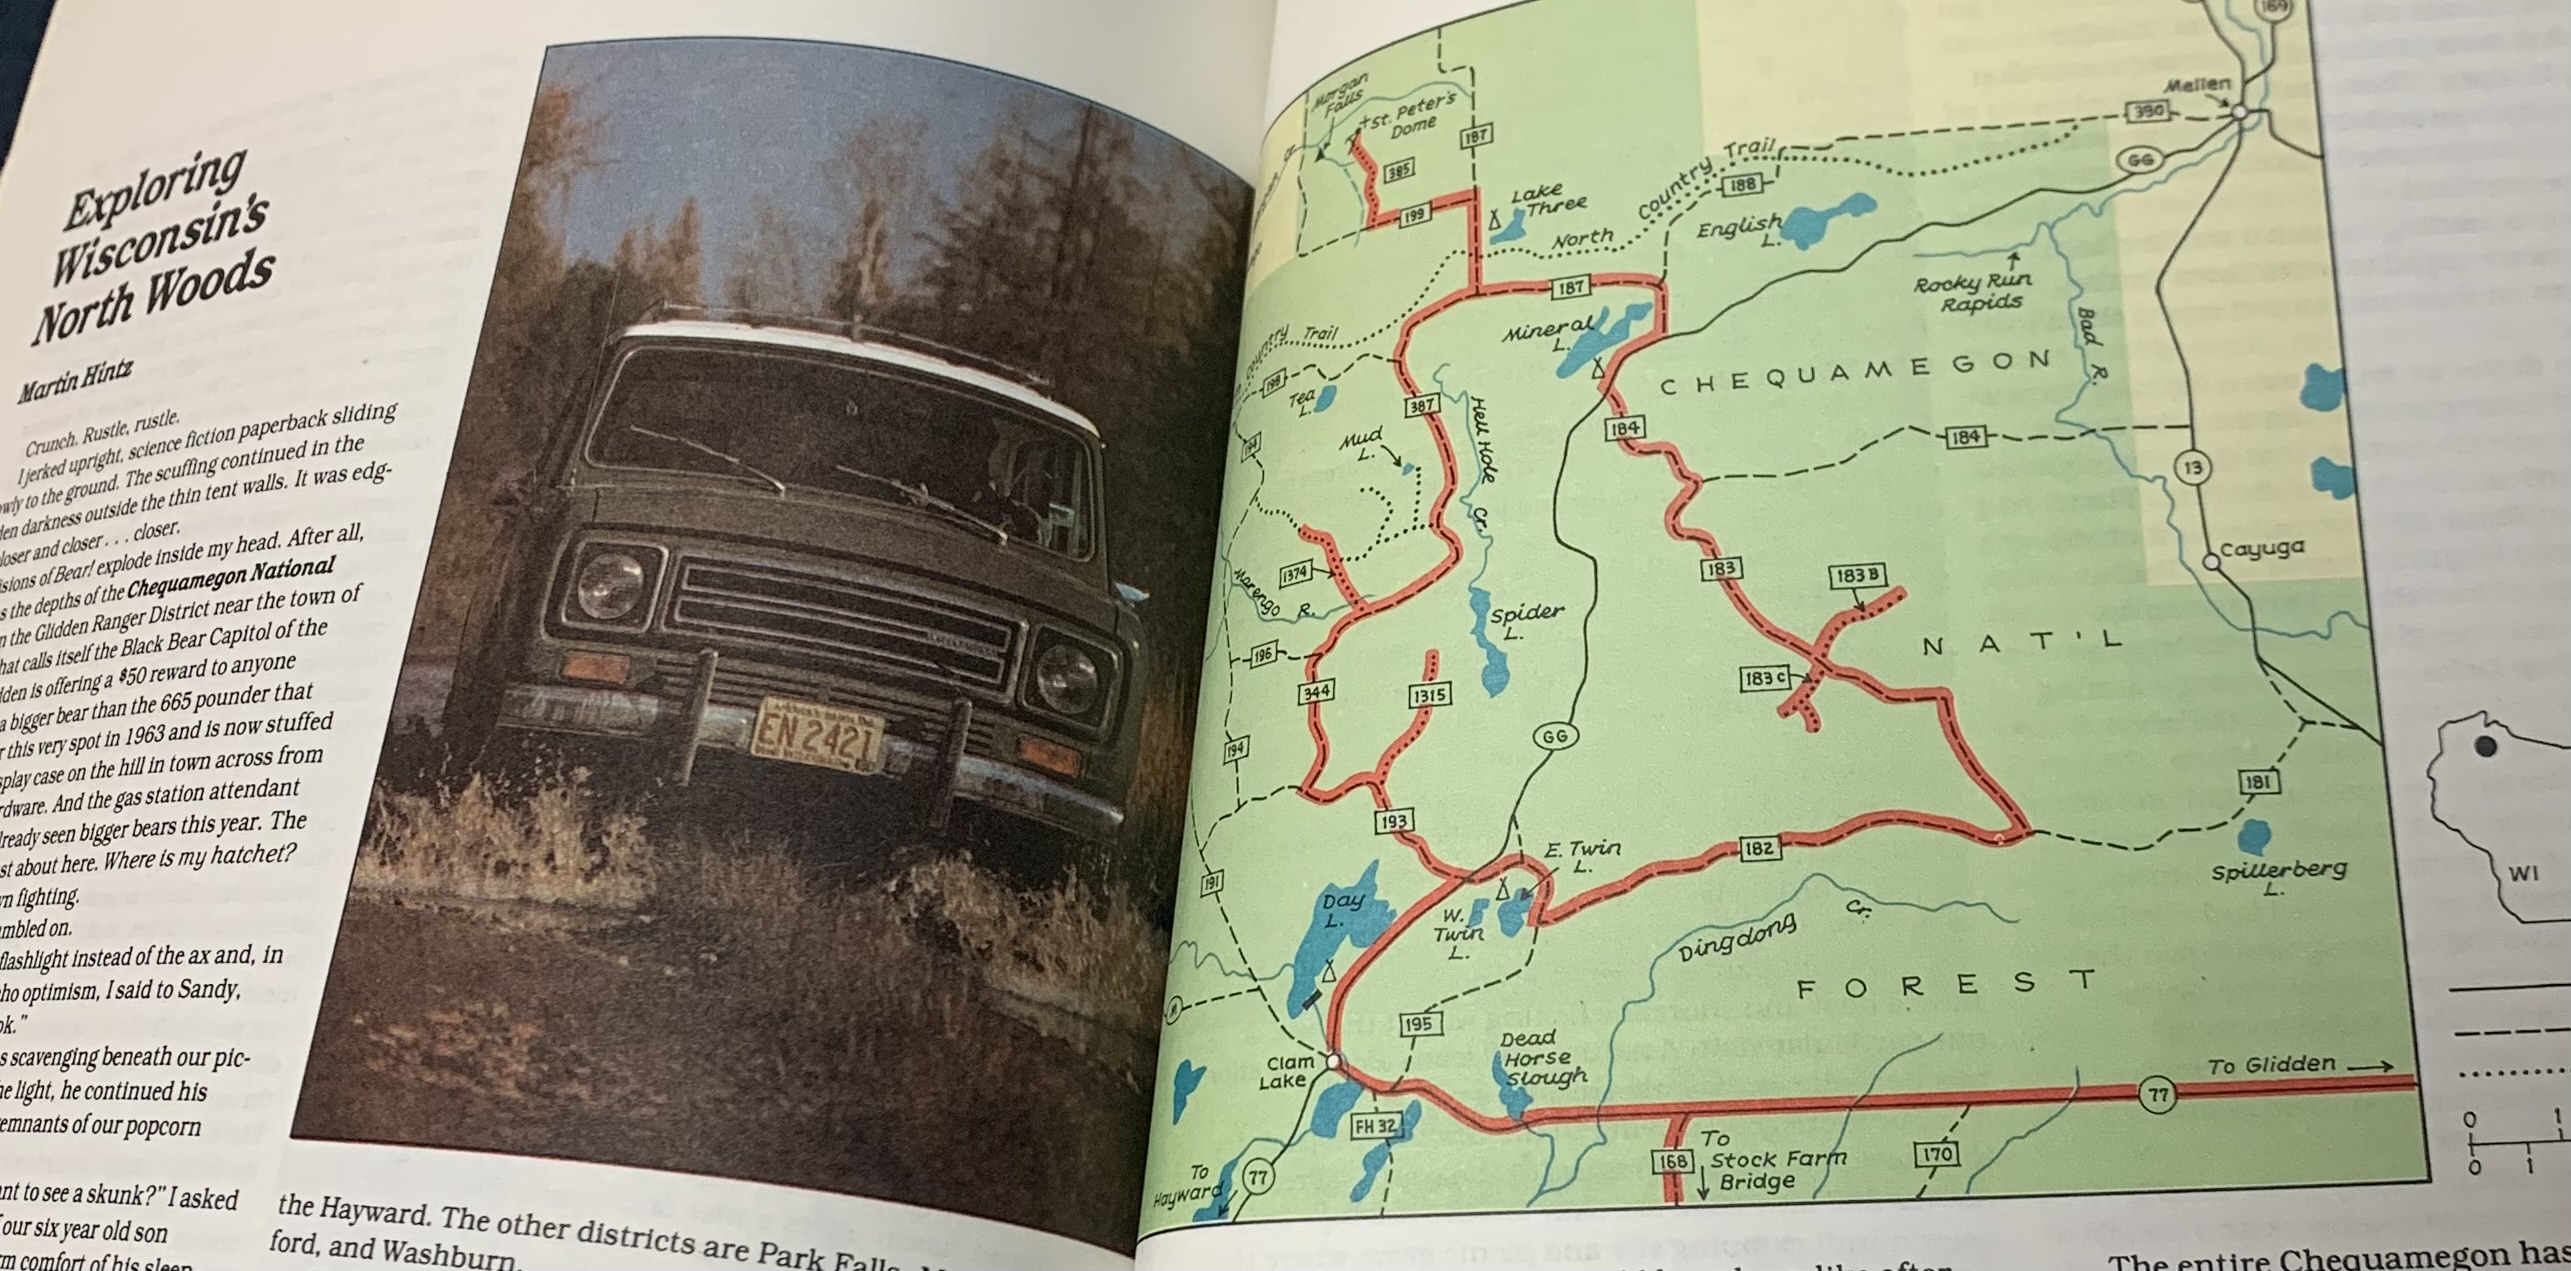 Scout II, Scout 80, Scout 800 International Scout Four-Wheel Drive North American Trail Guide